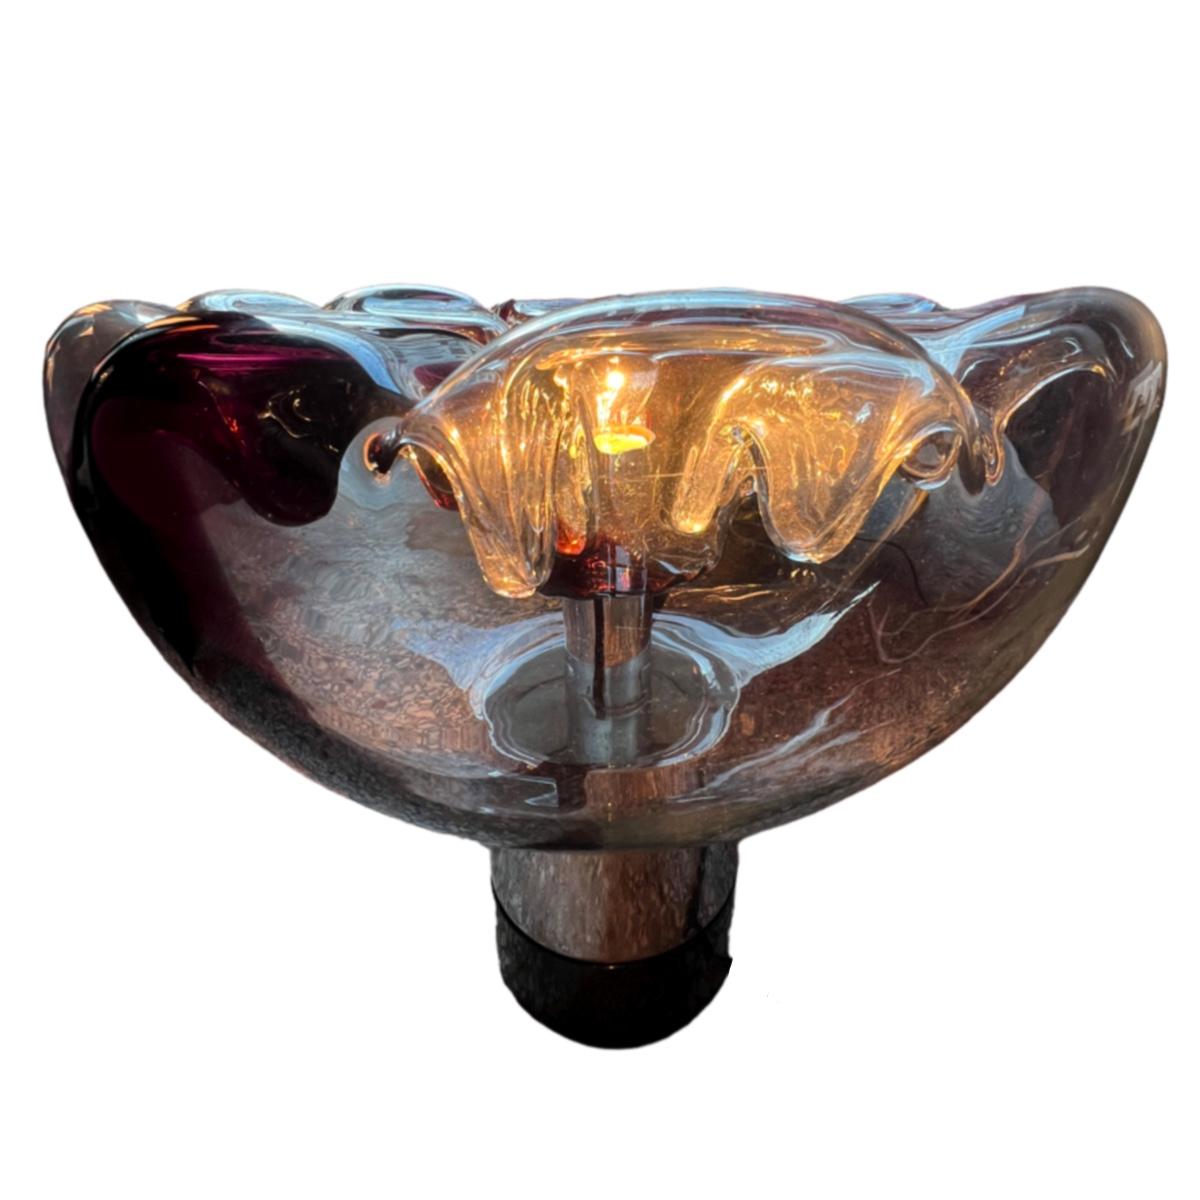 Very large table lamp by the famous glass designer, Toni Zuccheri, for the Italian company VeArt.
The mouth-blown glass is two-colored, transparent and dark Bordeaux.
From the top glass cones are hanging downwards, giving an incredible lighting